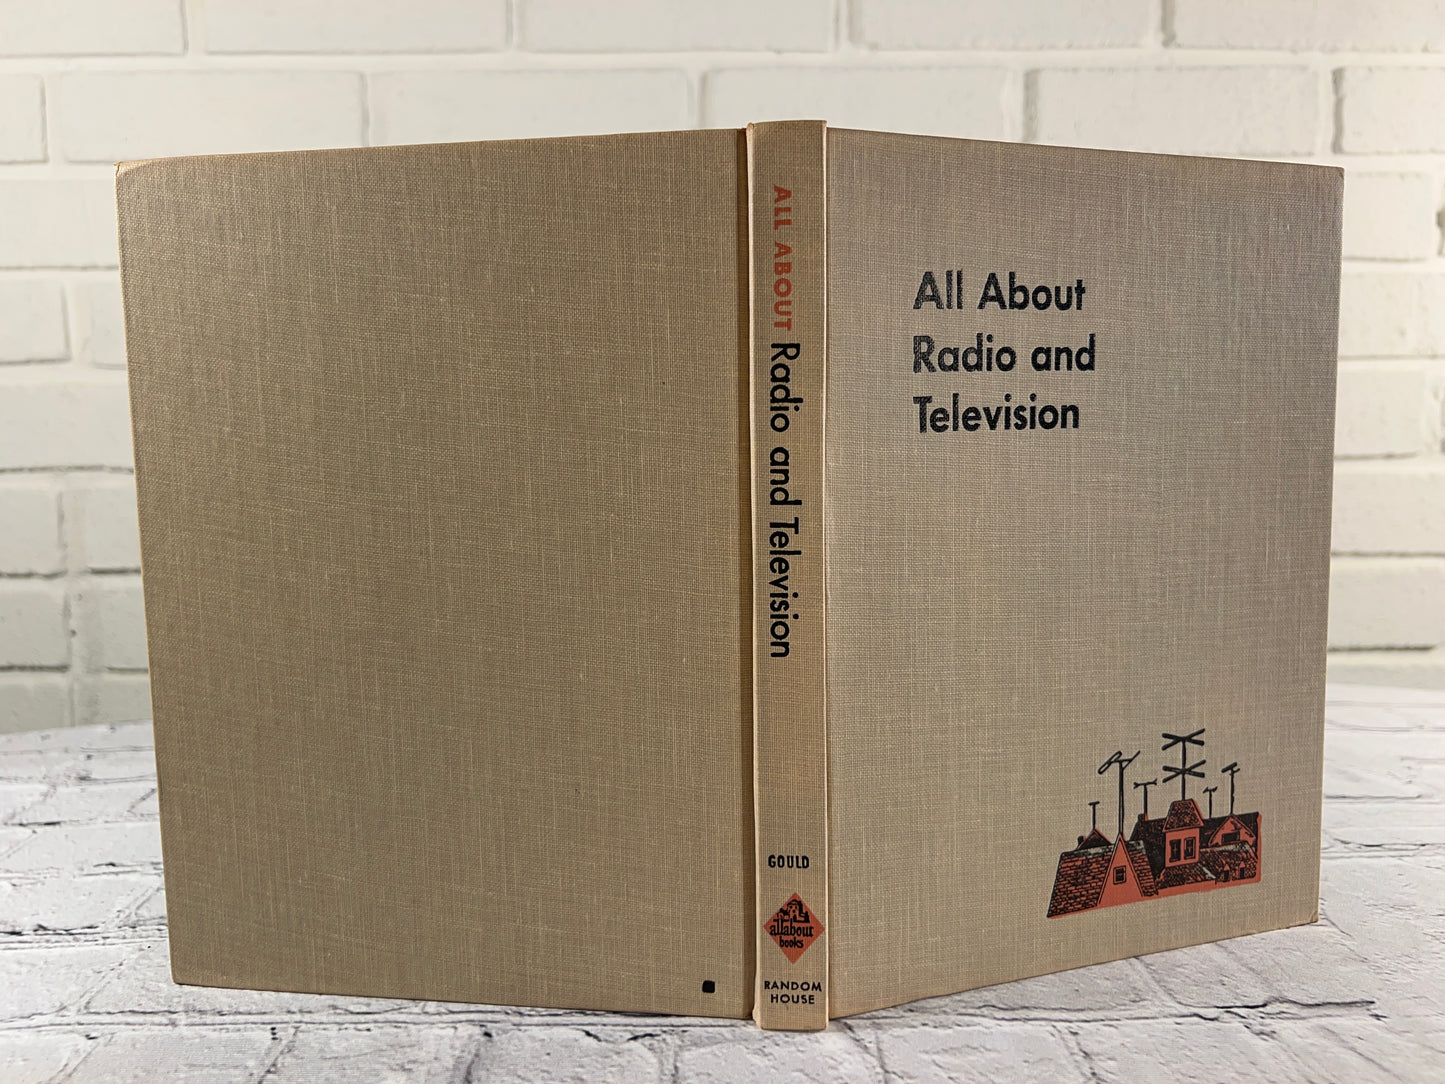 All About Books 2. All About Radio and Television by Jack Gould [1958 · 3rd Print]